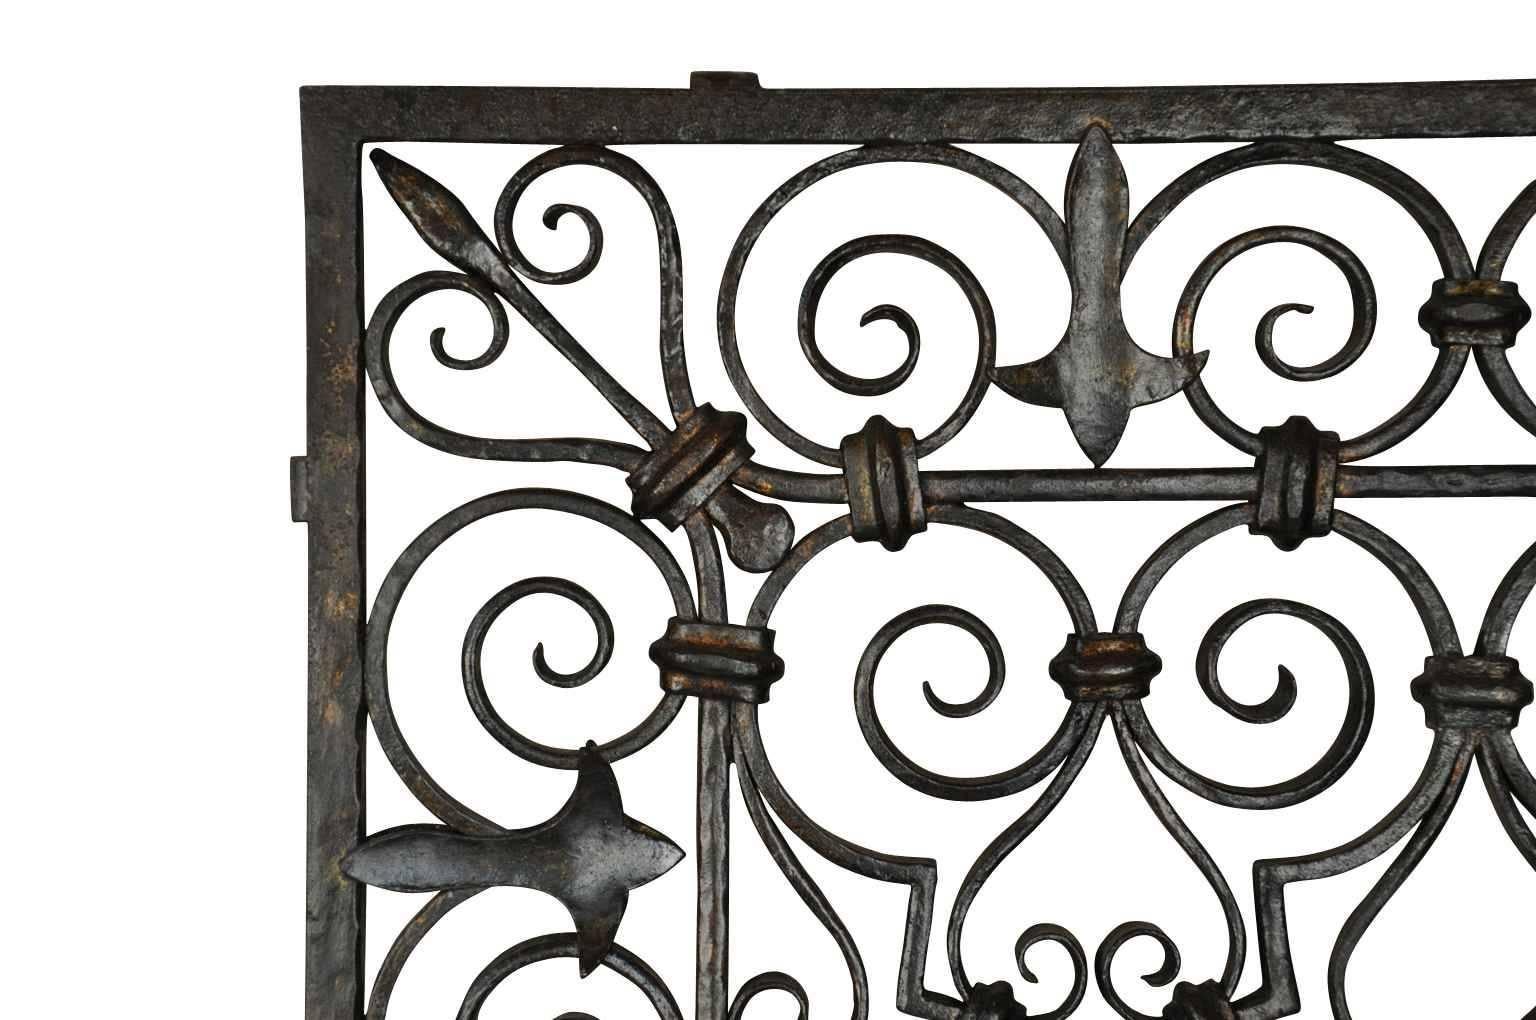 Spanish 19th Century Wrought Iron Grille Panel from Spain